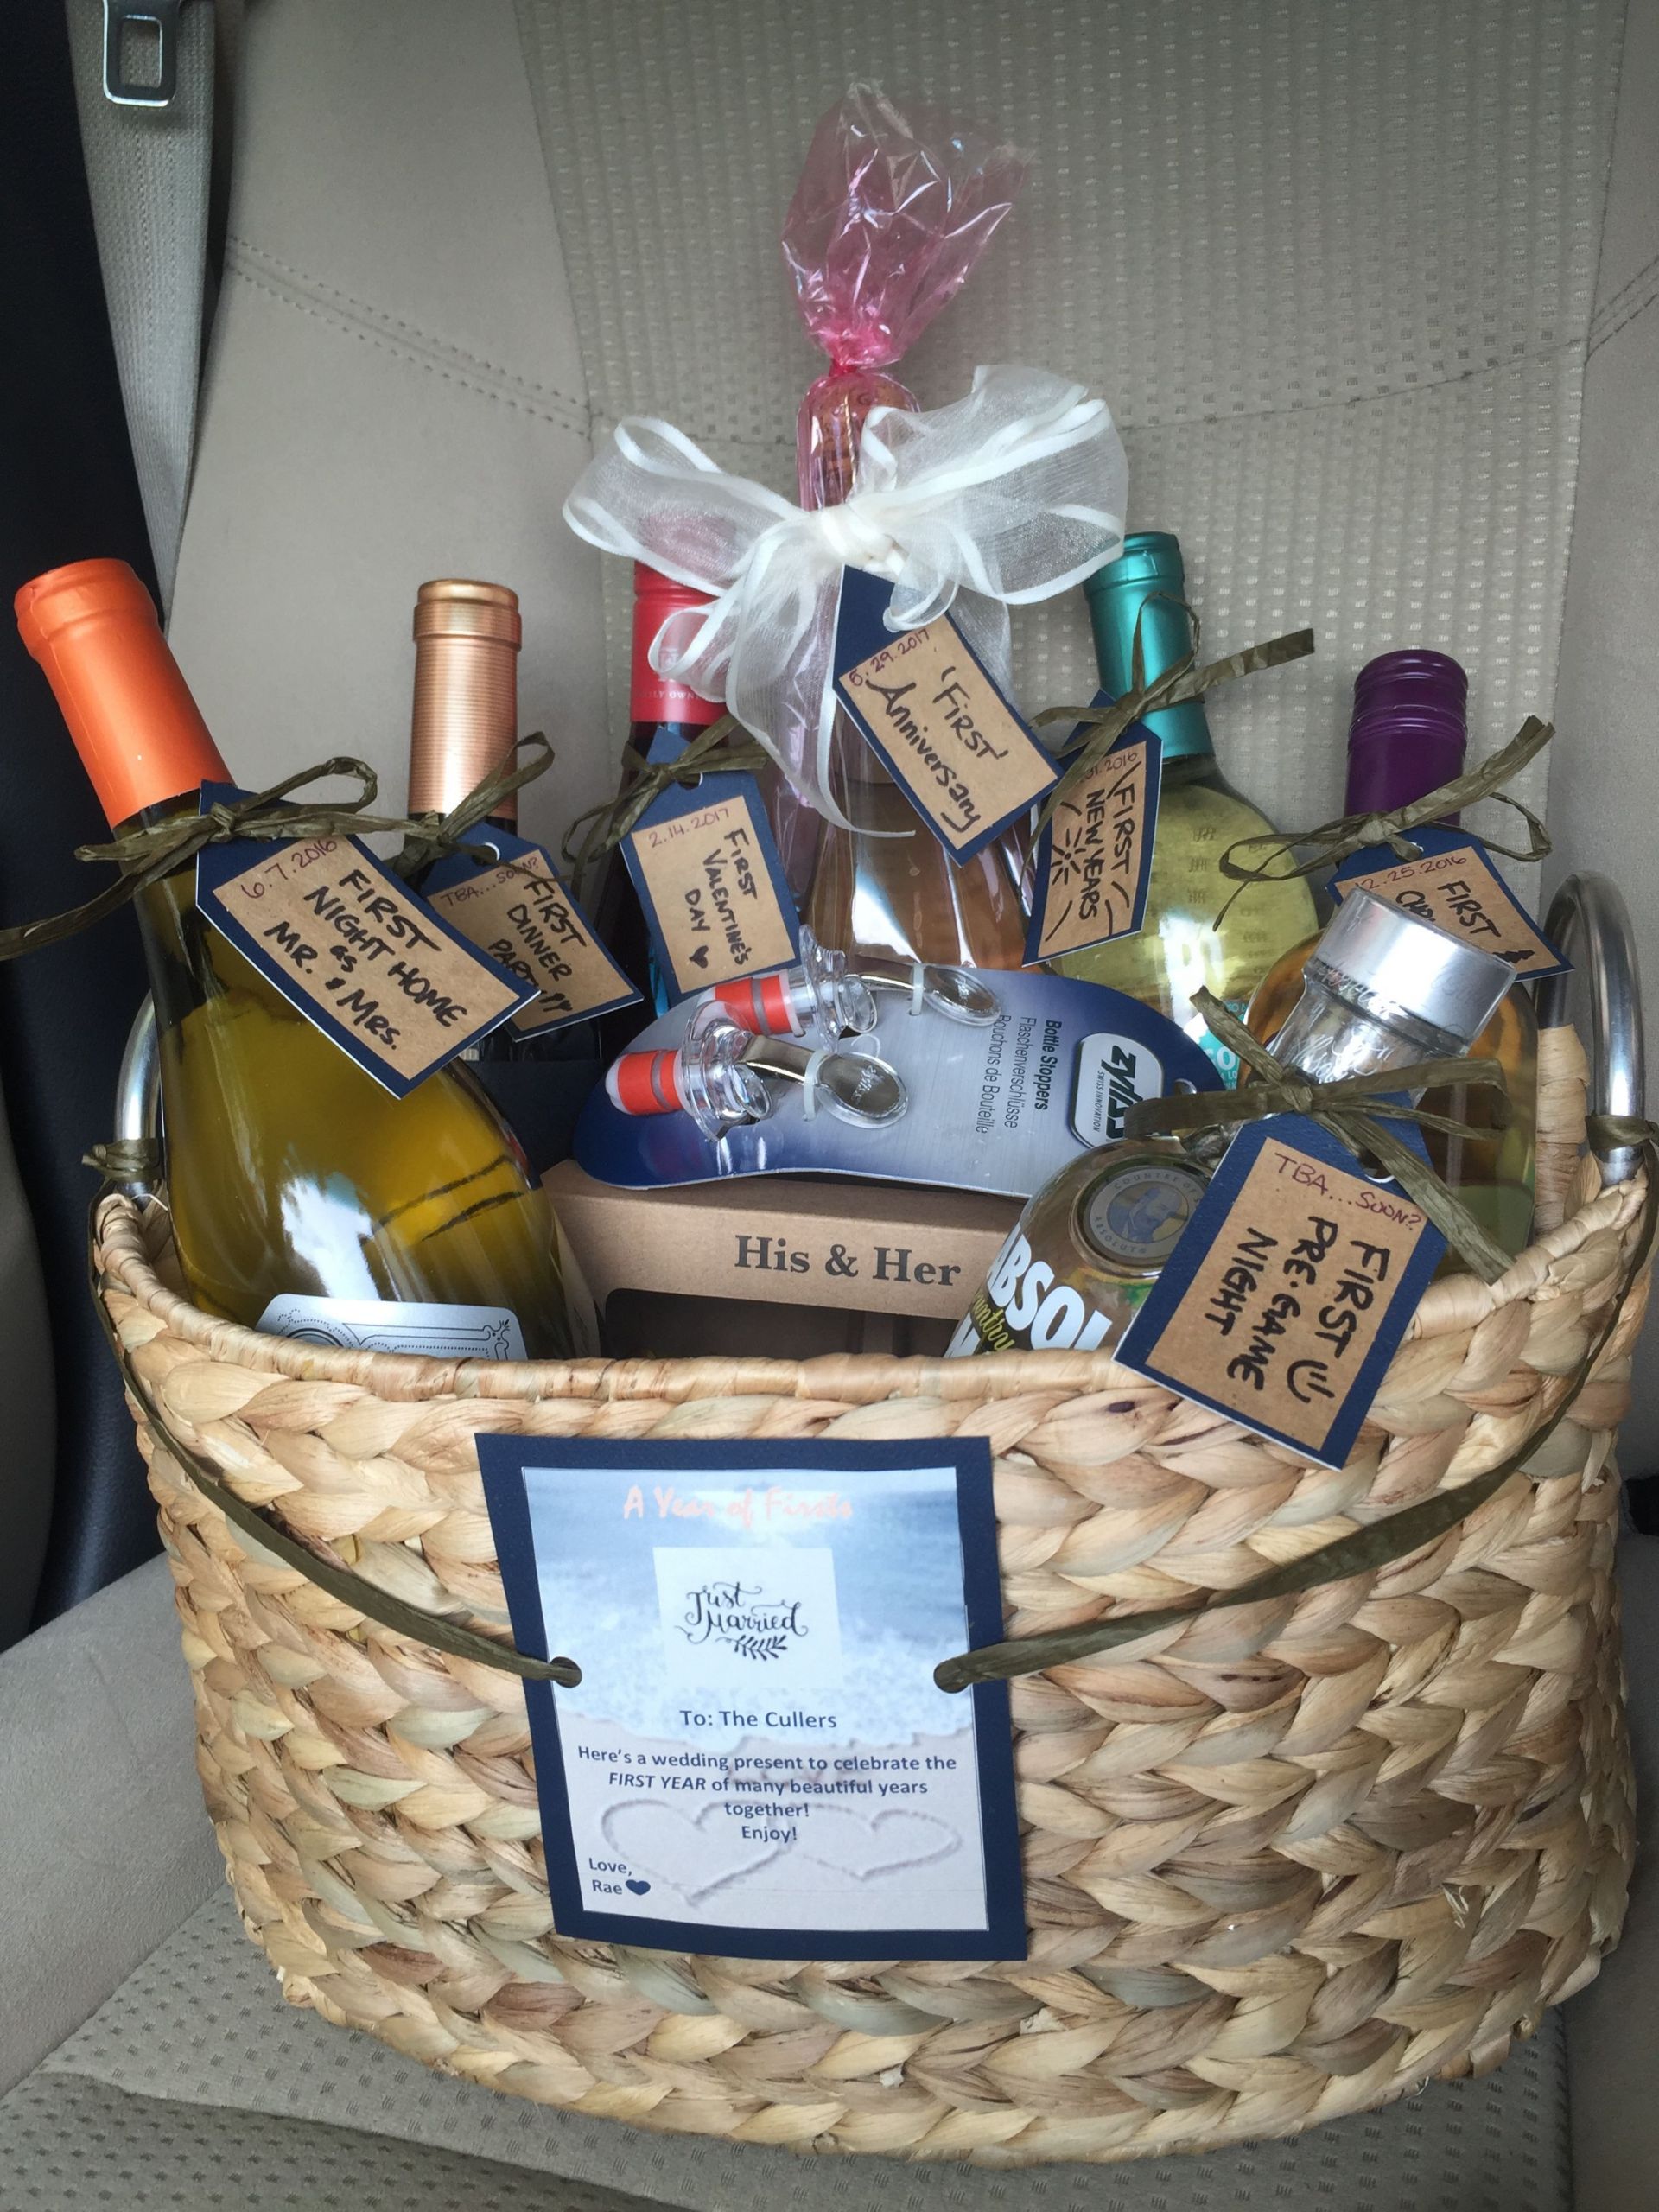 Wedding Gift Baskets Ideas
 A year of firsts The BEST and easiest wedding present for